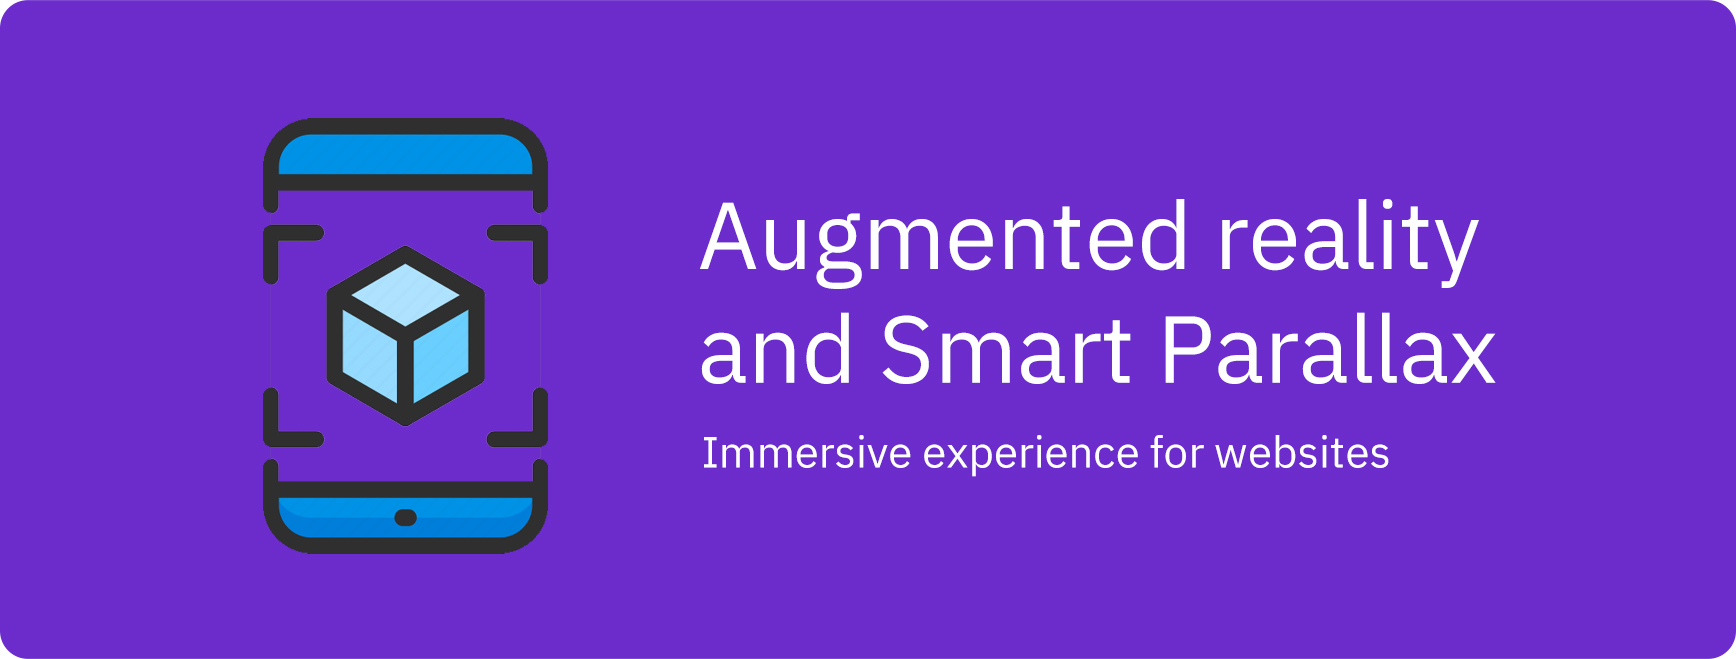 Augmented reality and smart parallax